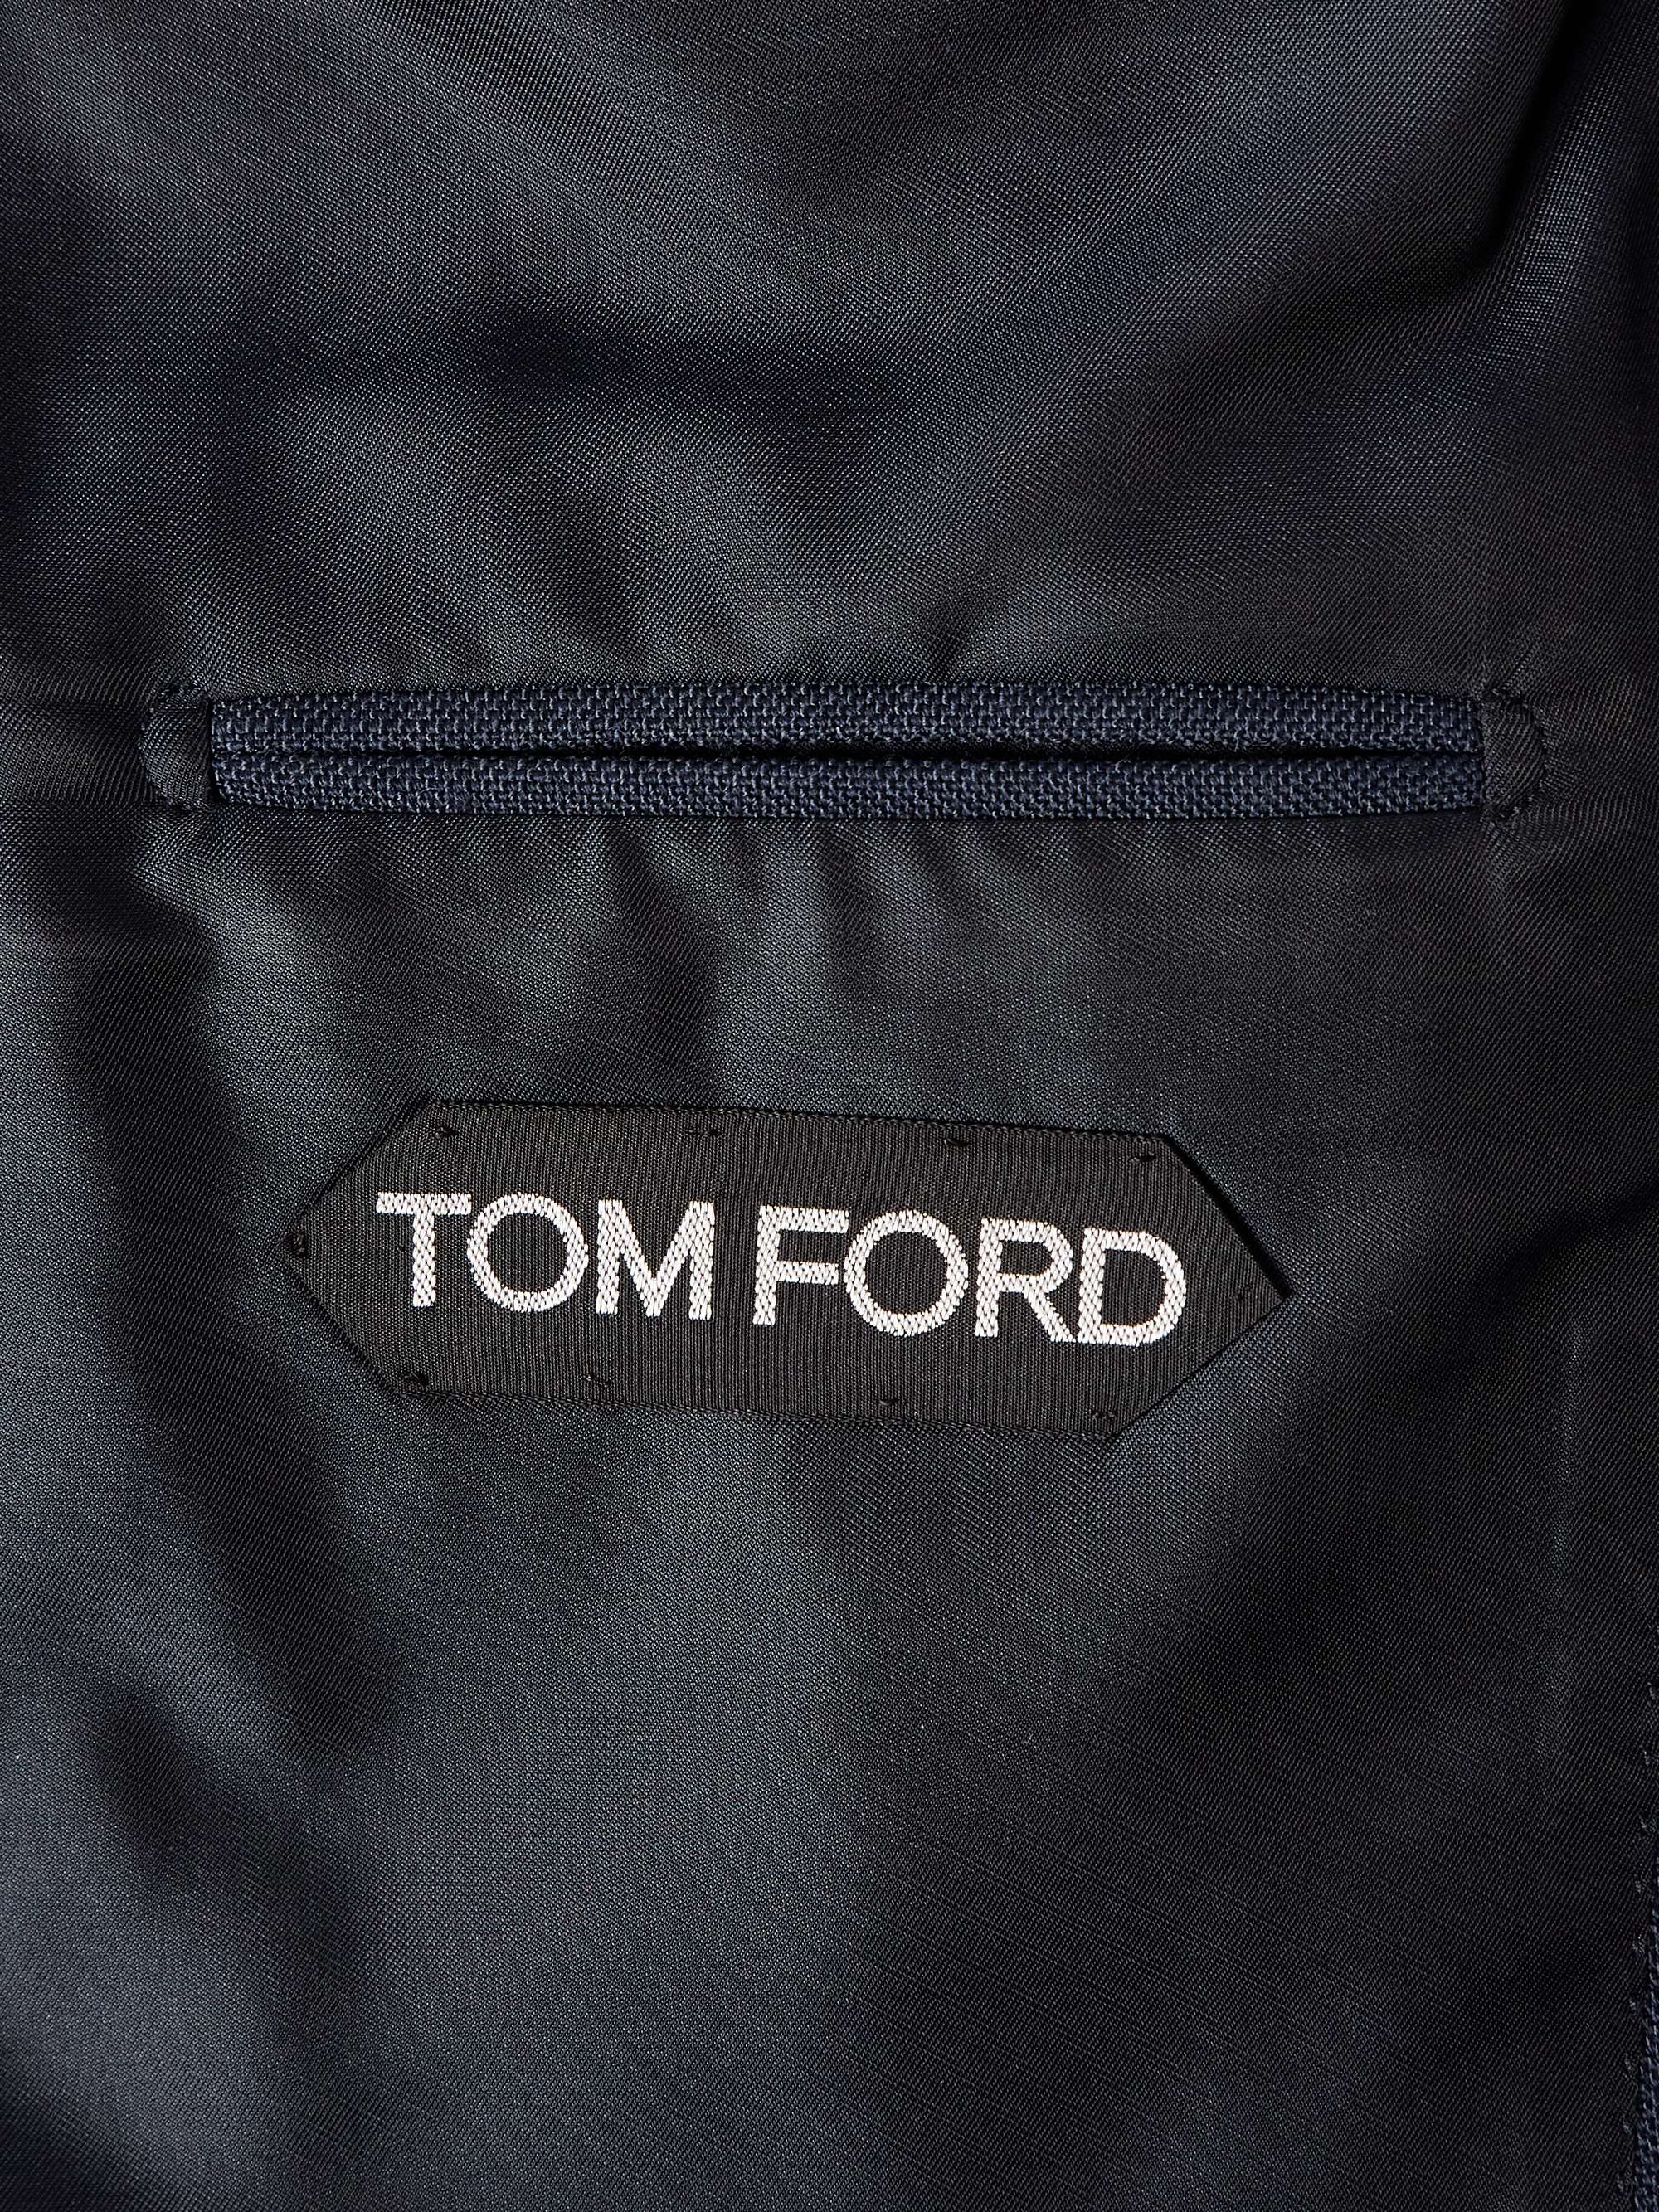 TOM FORD Shelton Slim-Fit Silk, Wool and Mohair-Blend Hopsack Suit ...